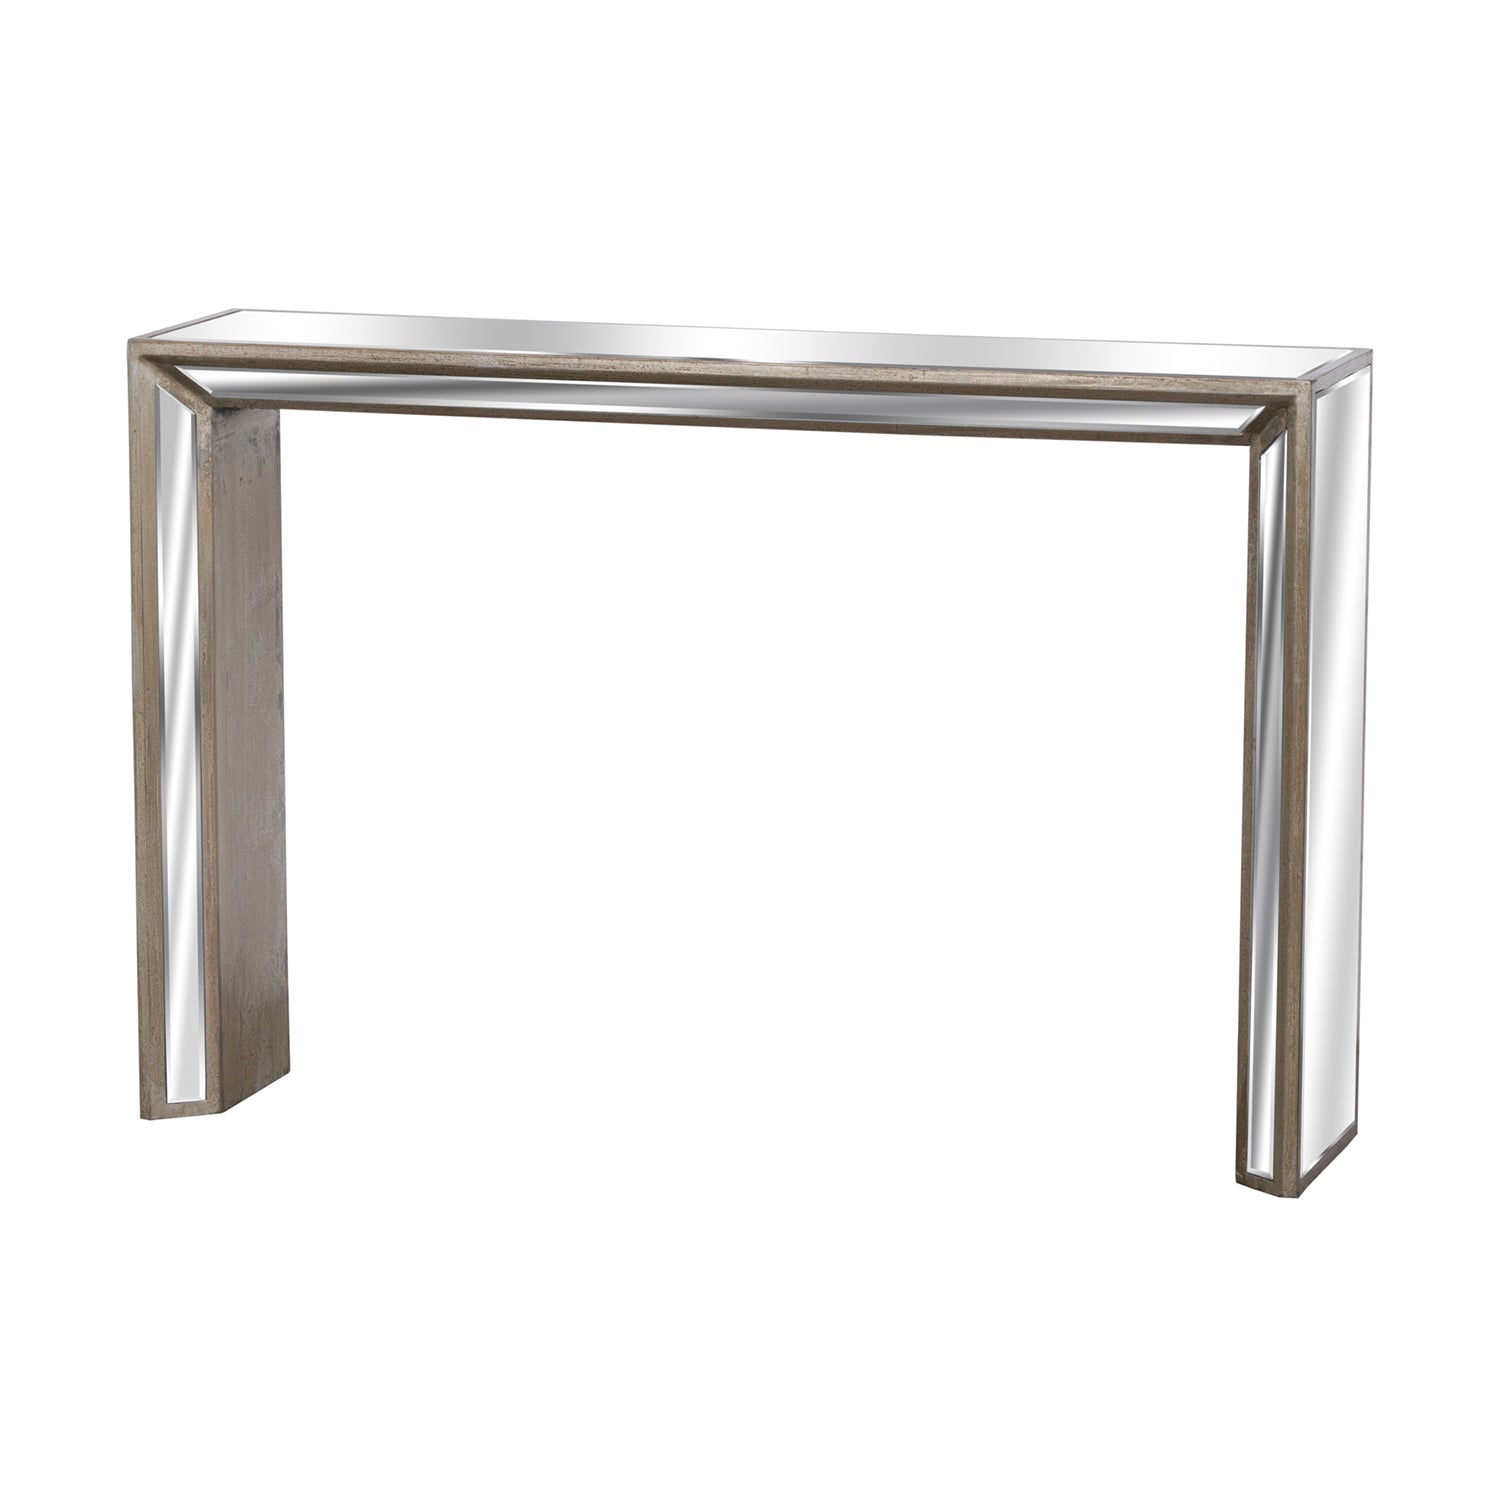 Augustus mirrored console table